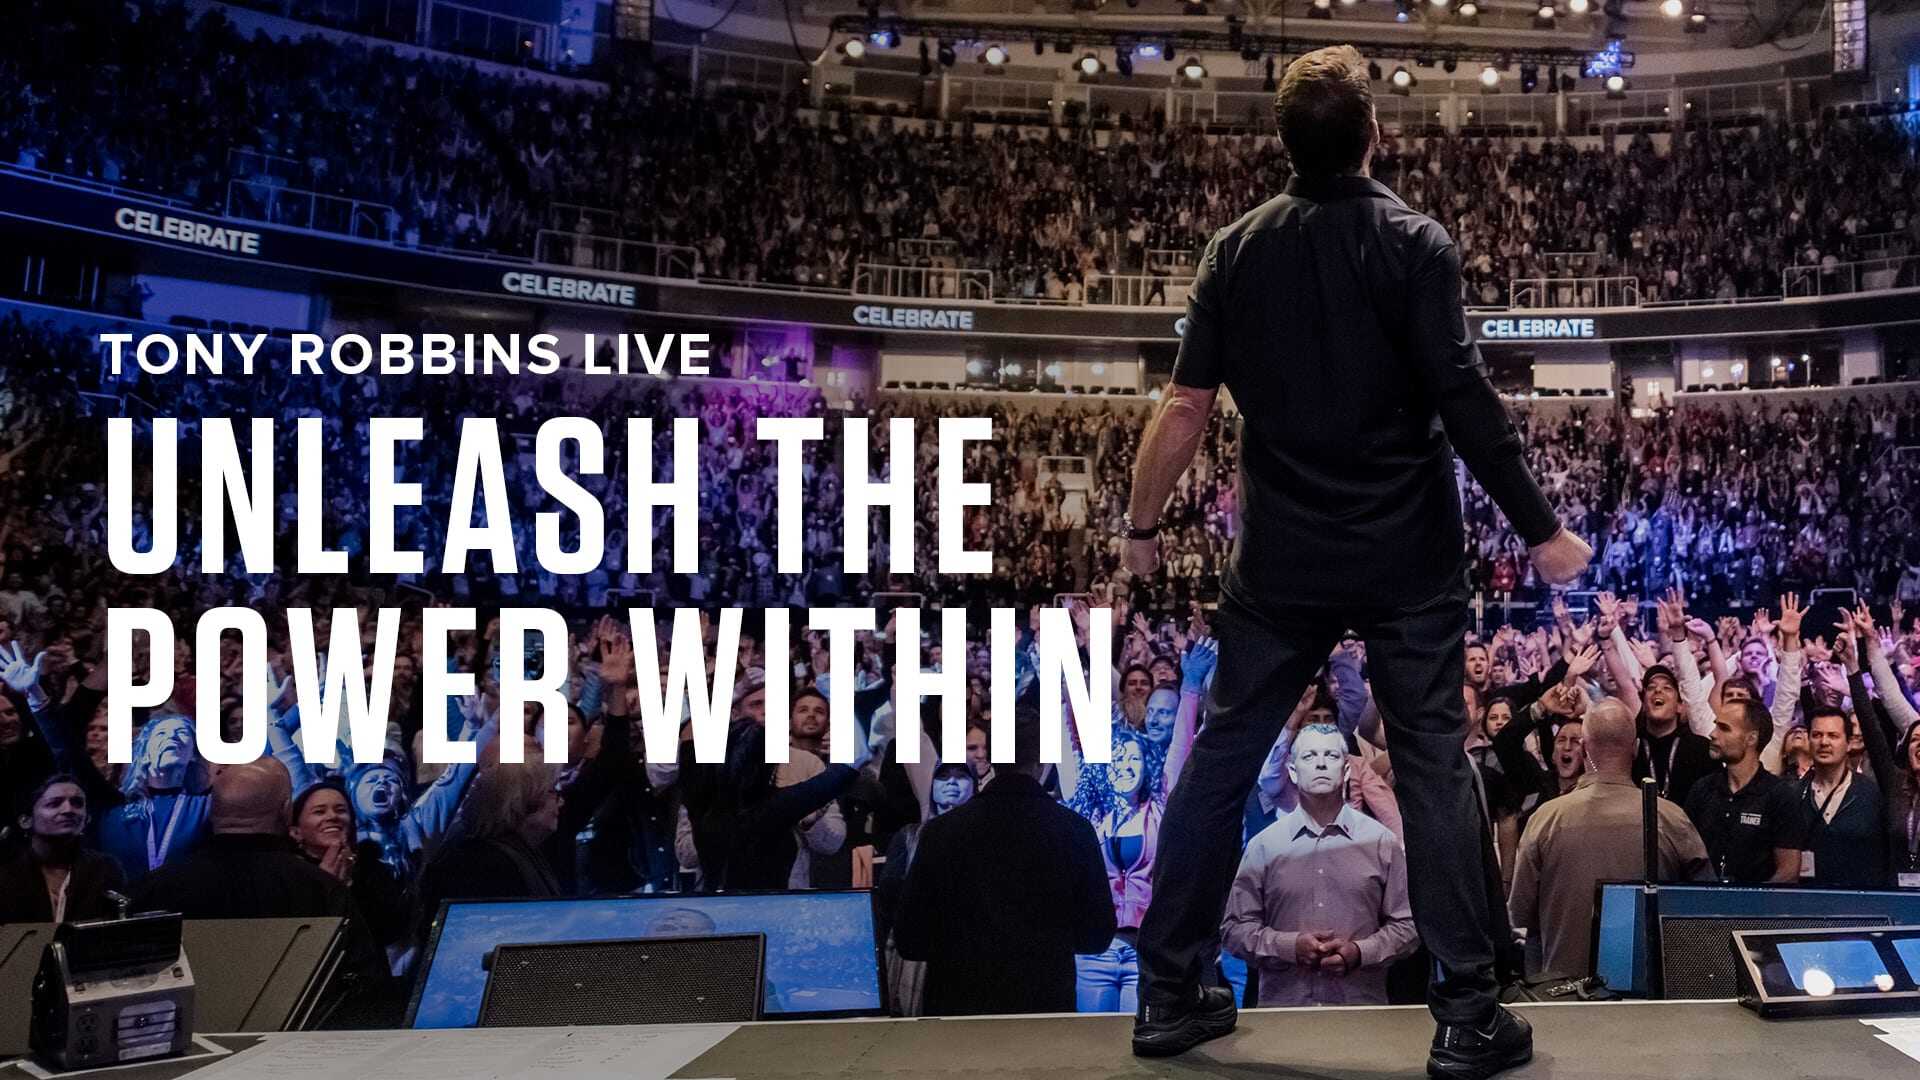 Tony Robbins The Worlds # 1 Life & Business Coach